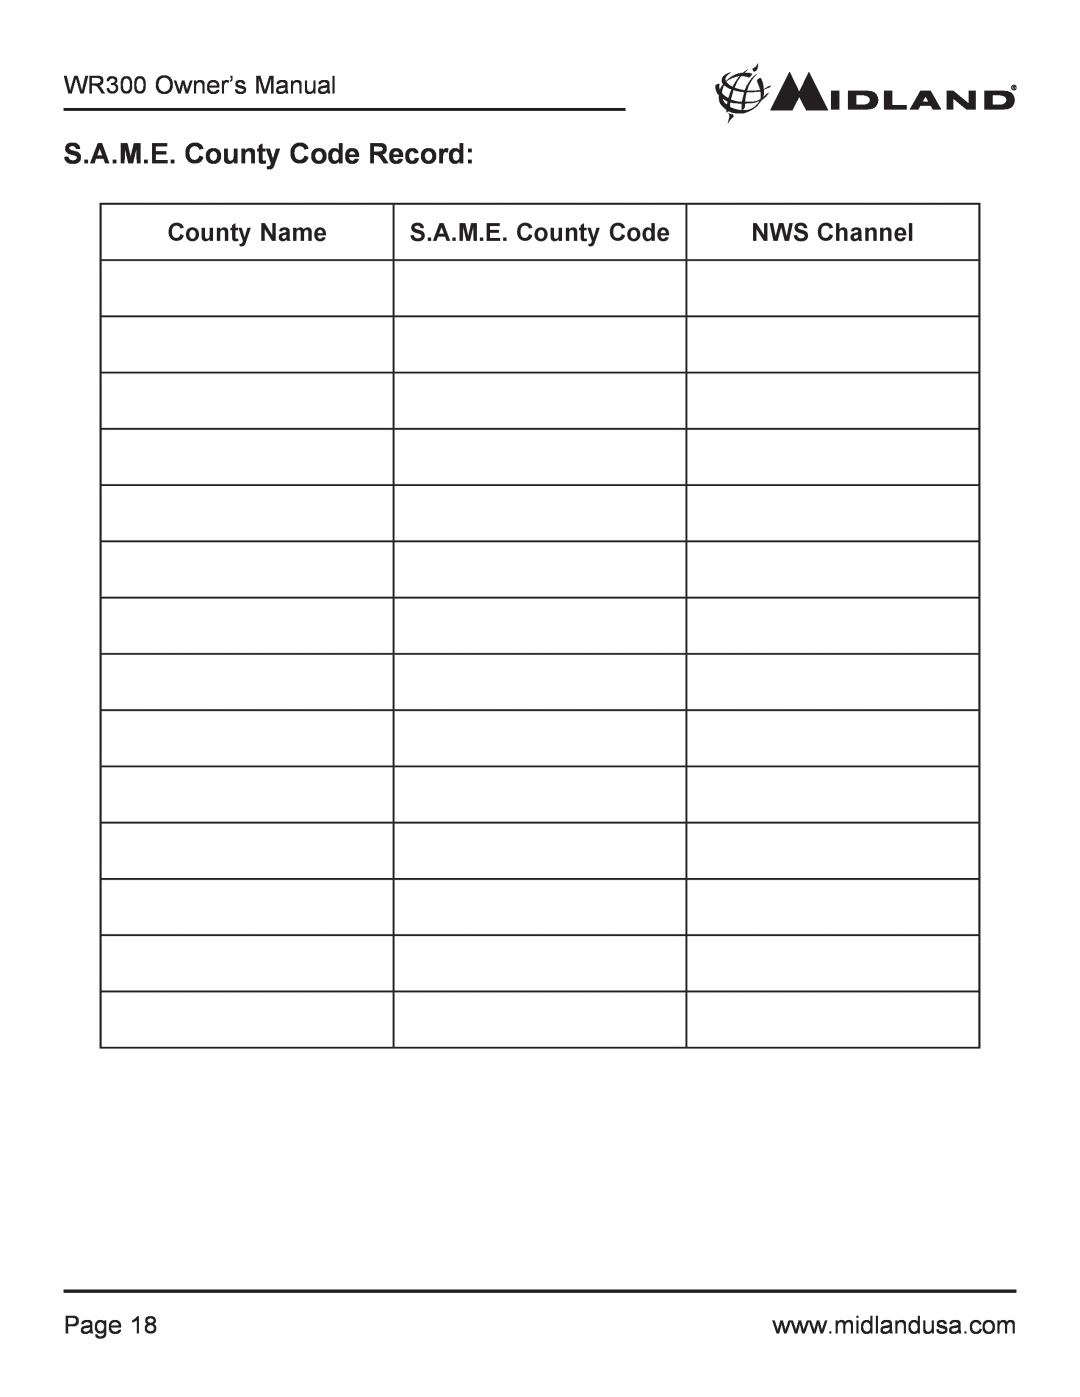 Midland Radio WR300 owner manual S.A.M.E. County Code Record, County Name, NWS Channel, Page 